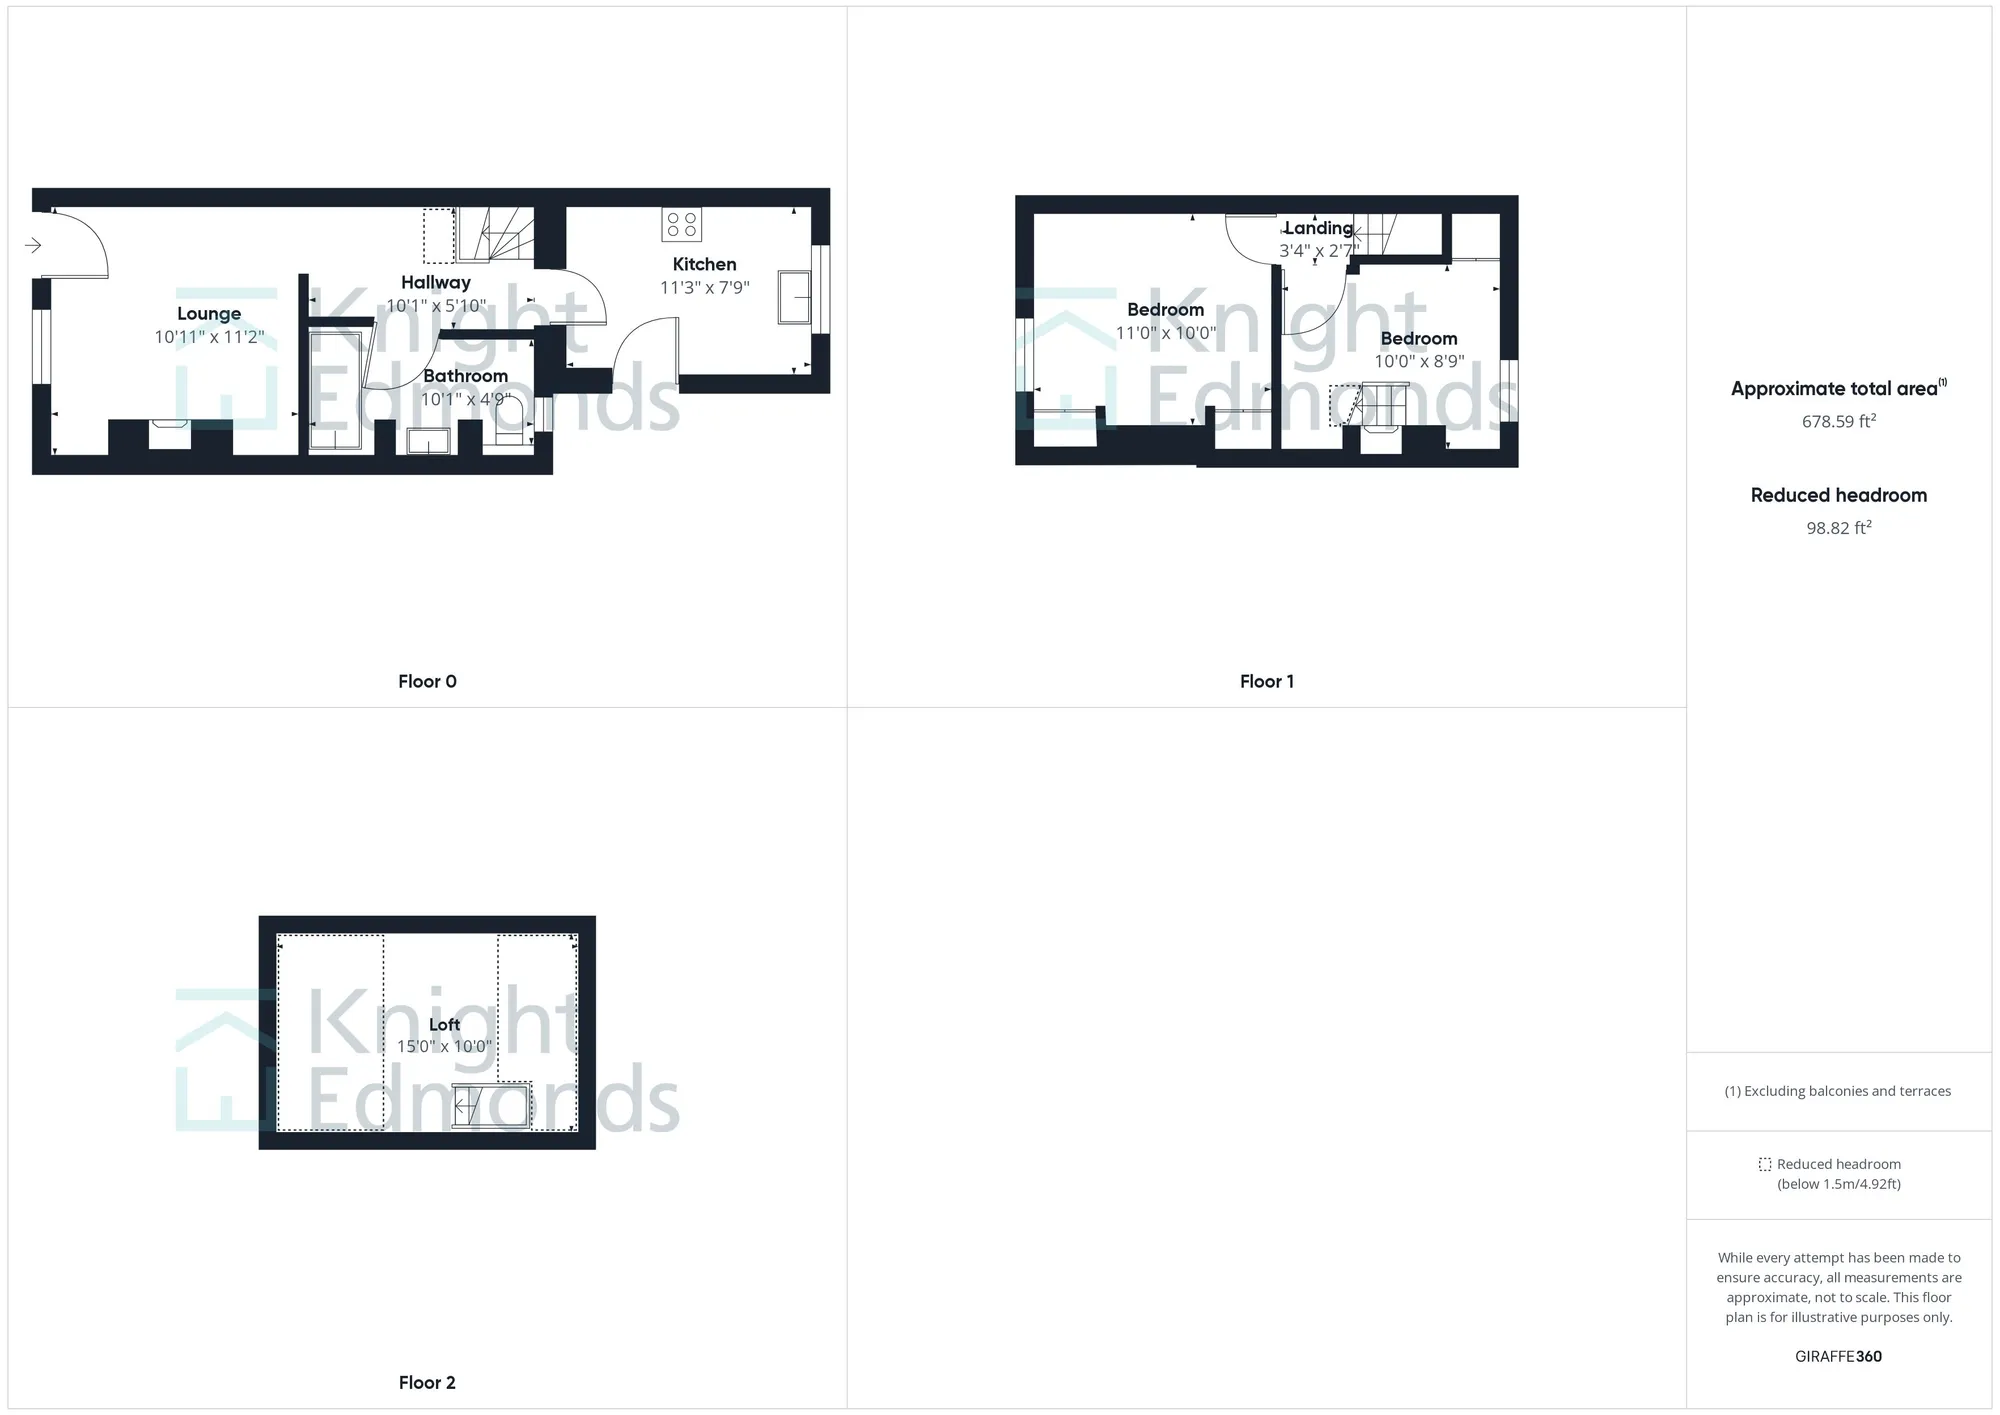 2 bed mid-terraced house for sale in Upper Street, Maidstone - Property floorplan